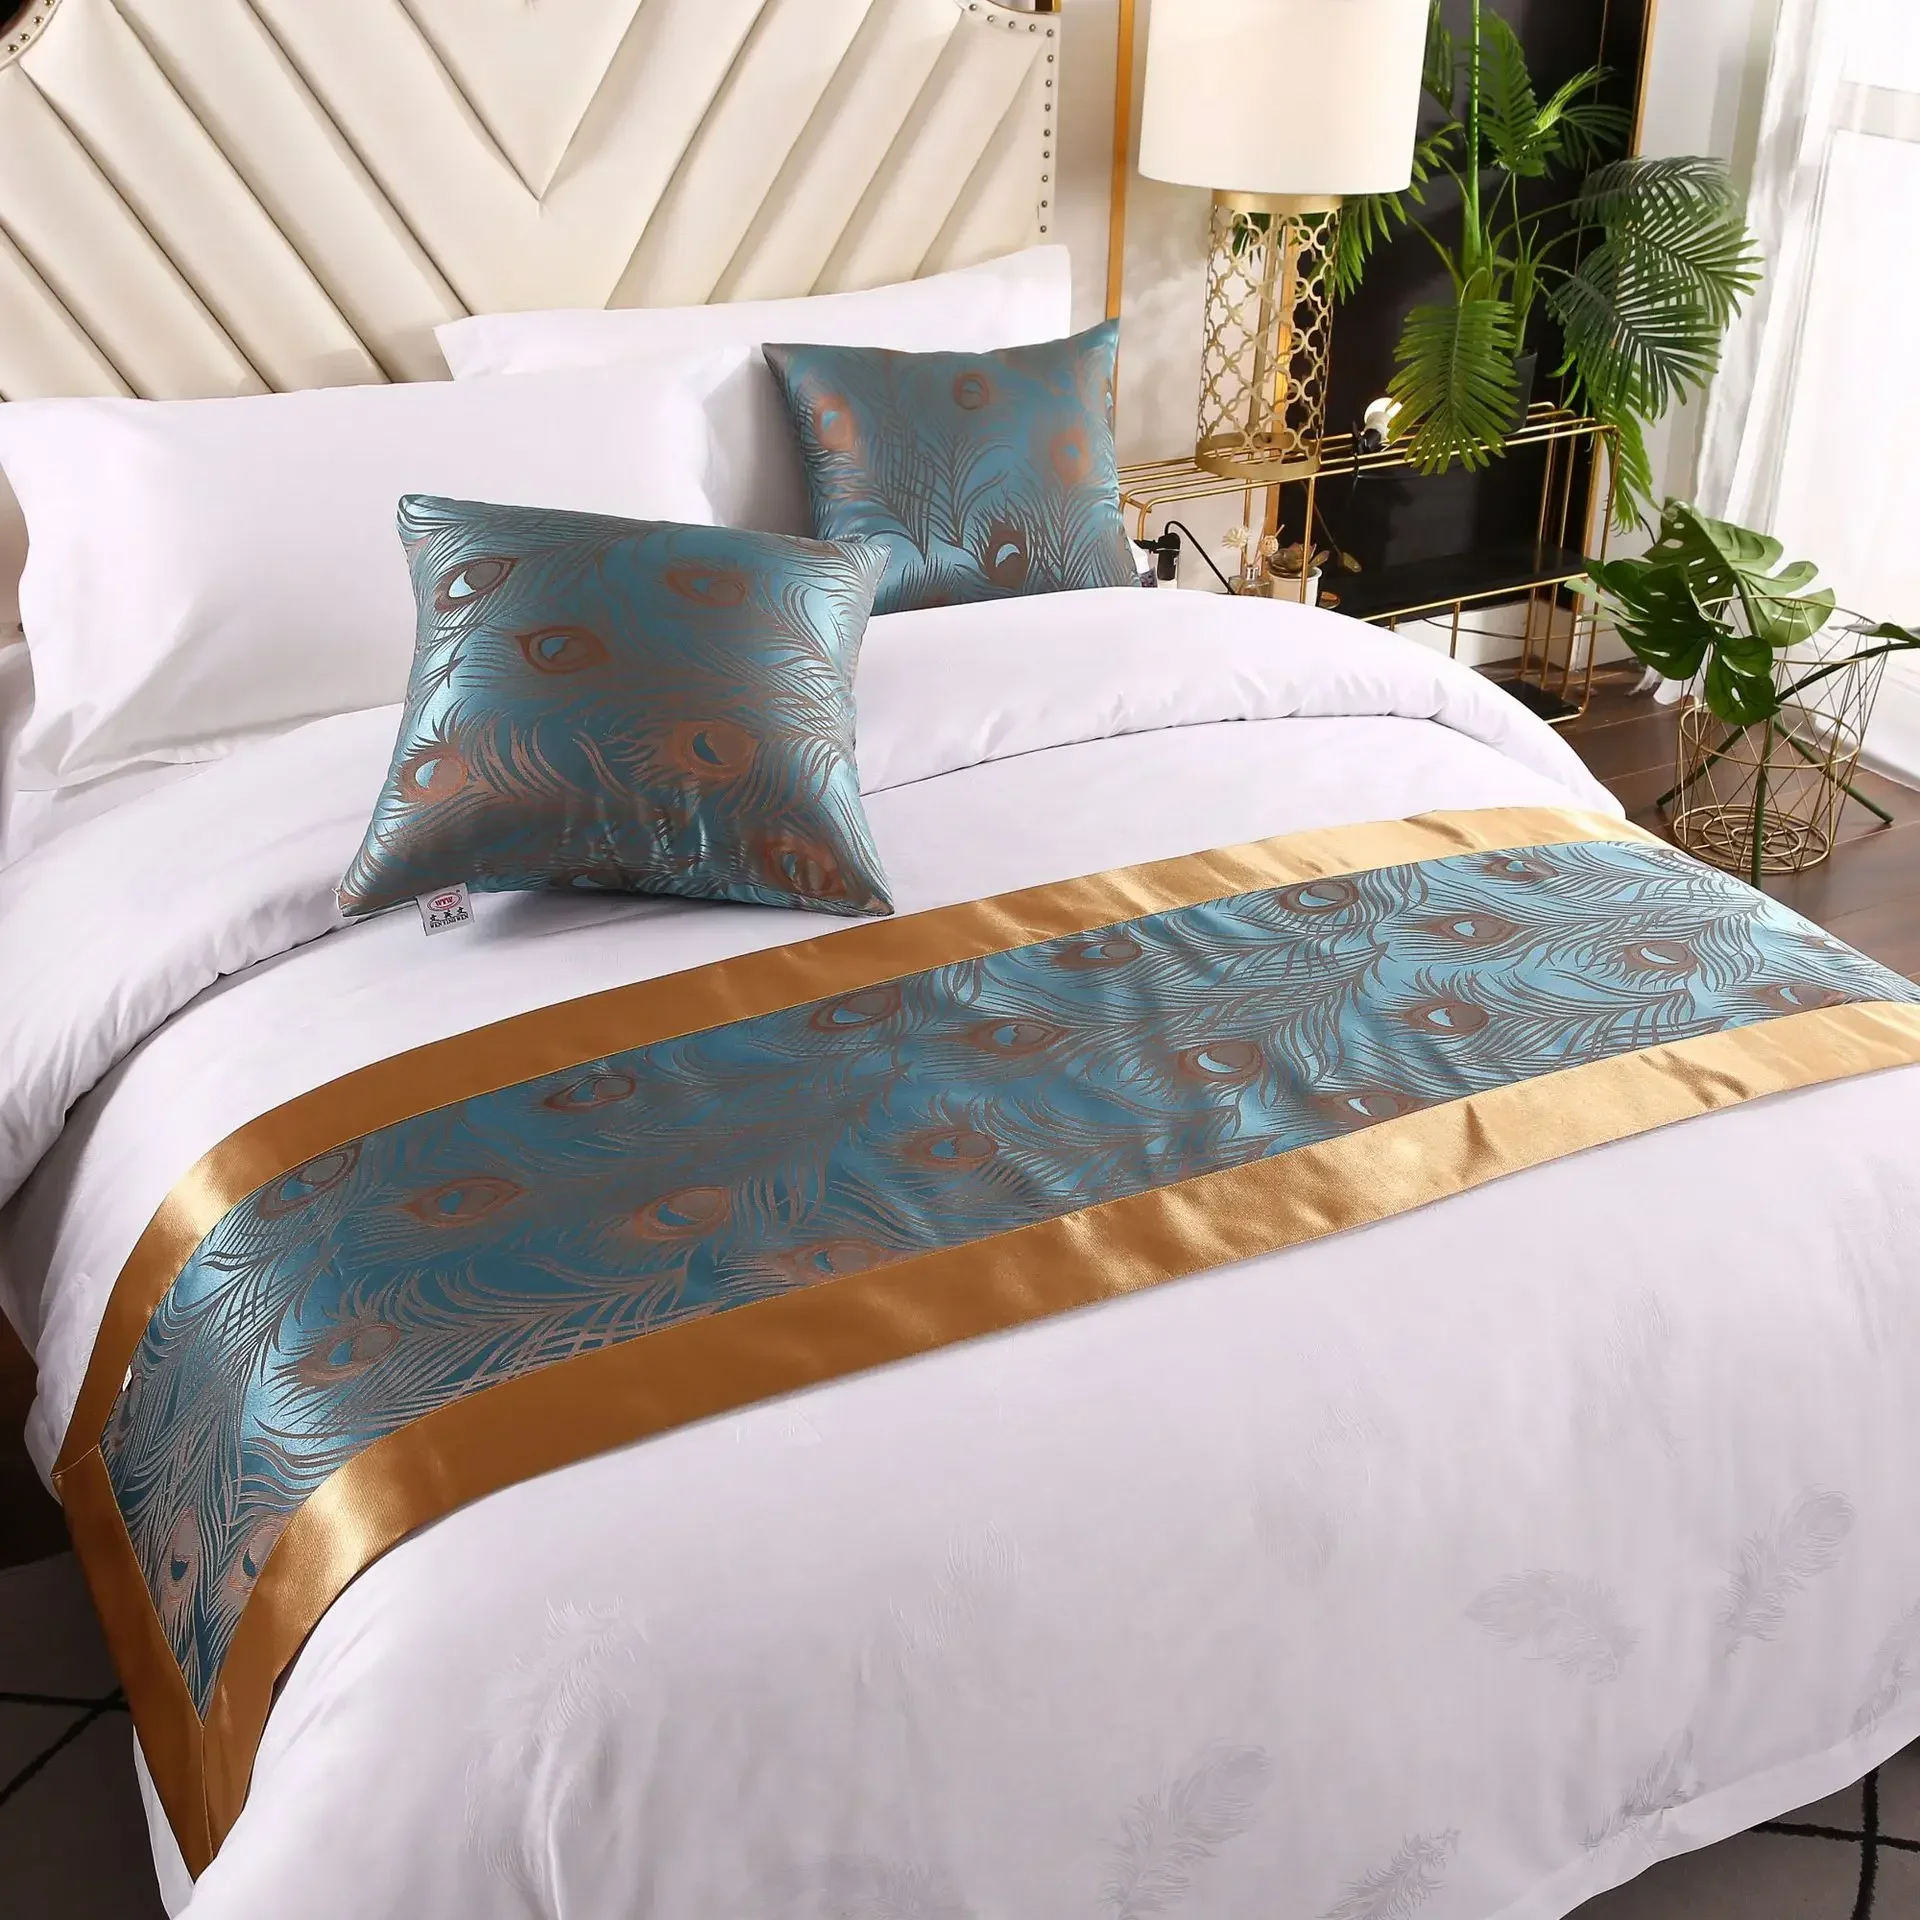 

50cm Wide Phoenix Tail Patterned Bed Flag Blue Background with Gold Edge Bedside Towel Bedding Decorations for Hotels Homestays